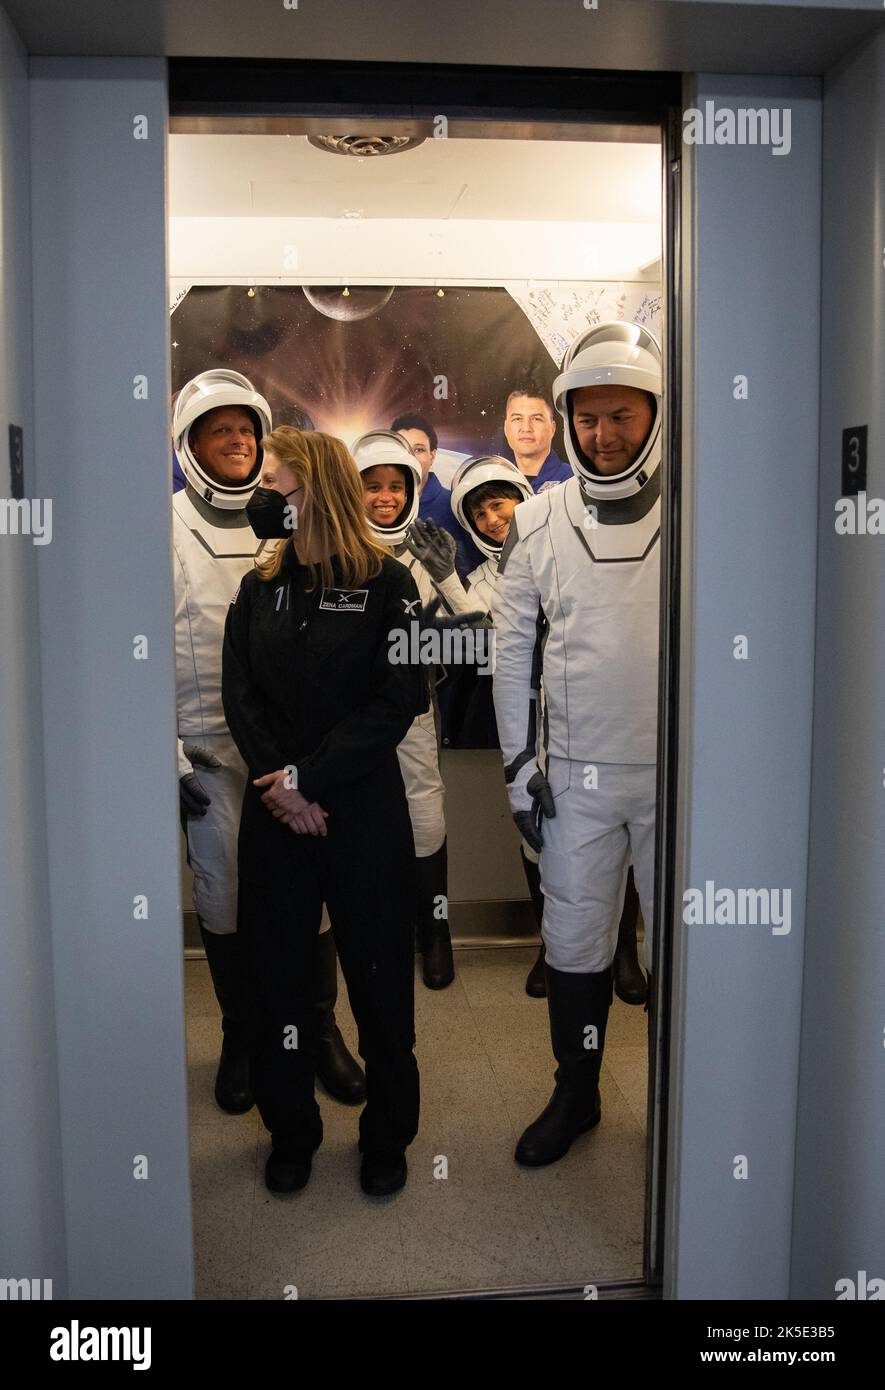 Crew-4 mission astronauts Kjell Lindgren, Bob Hines, Jessica Watson, and Samantha Cristoforetti, enter the elevator in the Astronaut Crew Quarters inside Kennedy Space Center’s Neil A. Armstrong Operations and Checkout Building on April 27, 2022. A team of SpaceX suit technicians assisted the crew as they put on their custom-fitted spacesuits and checked the suits for leaks. The four astronauts will launch aboard SpaceX’s Crew Dragon, powered by the company’s Falcon 9 rocket, to the International Space Station as part of NASA’s Commercial Crew Program. Crew-4 is scheduled to lift off today at Stock Photo